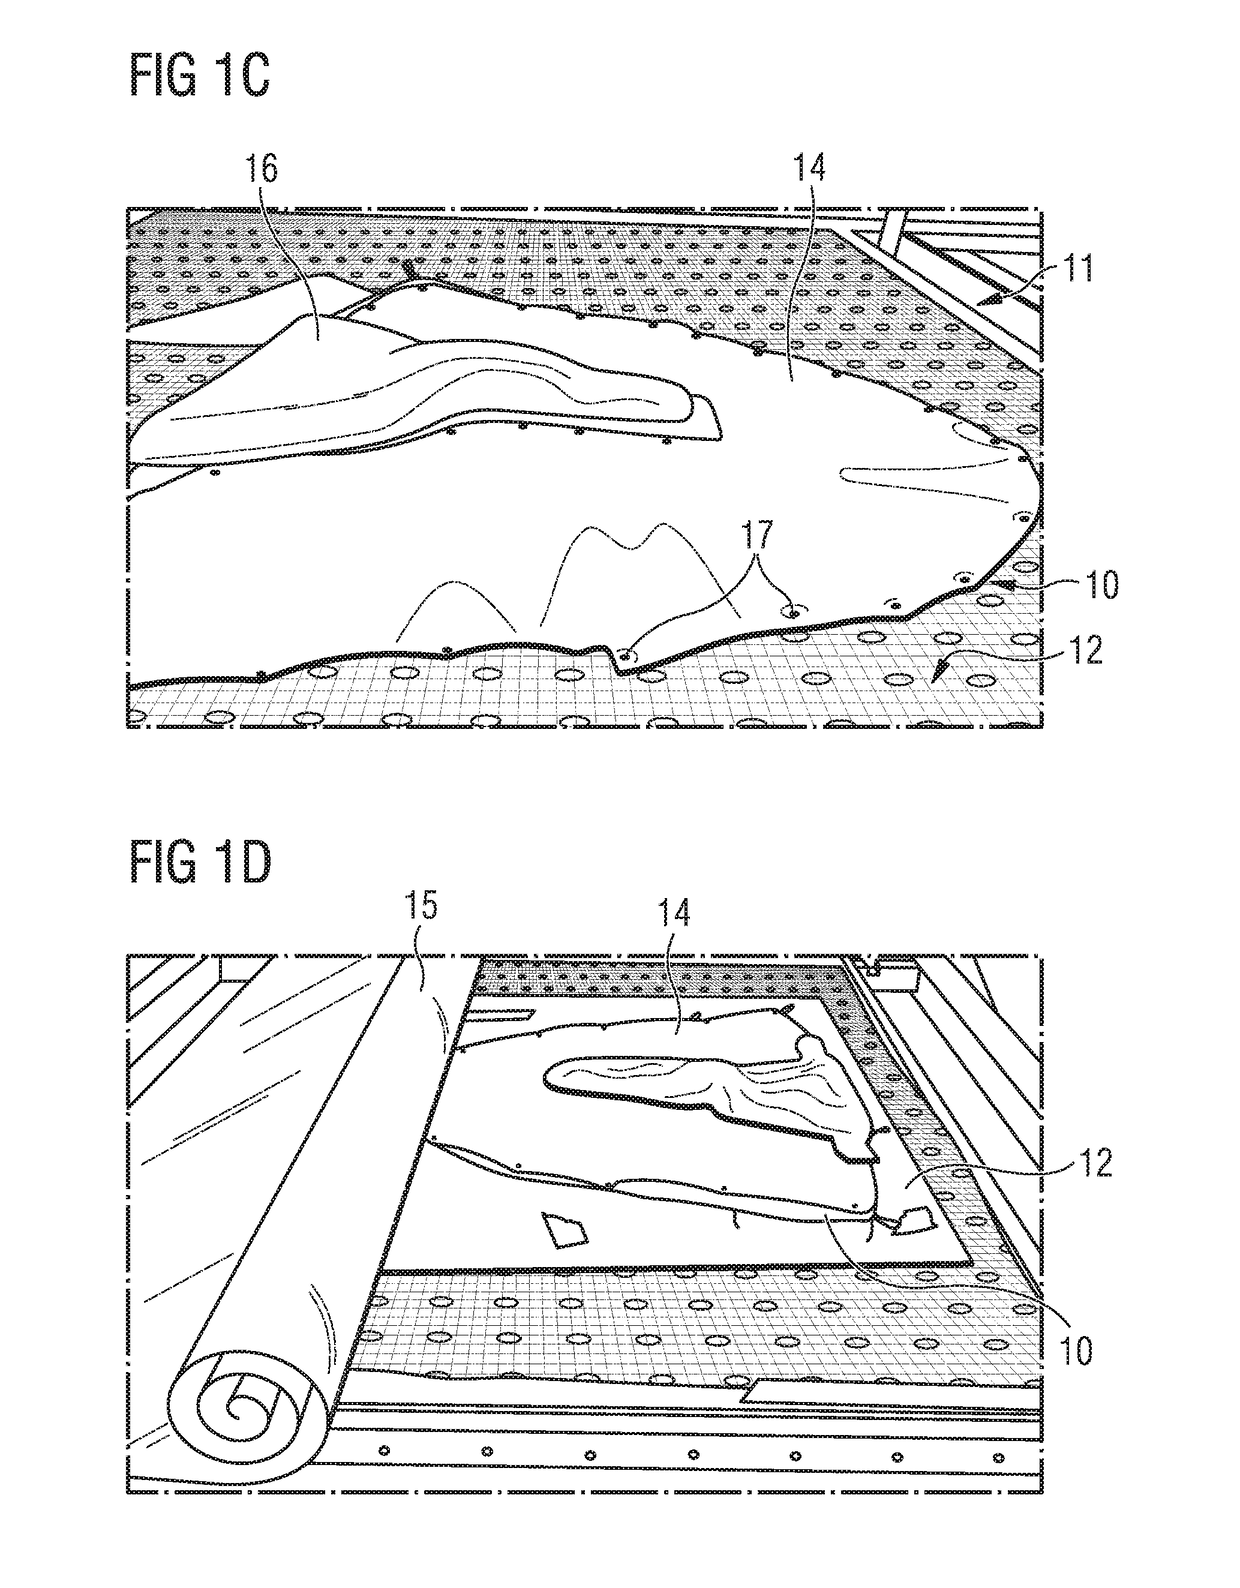 Manufacturing method for coating a fabric with a three-dimensional shape